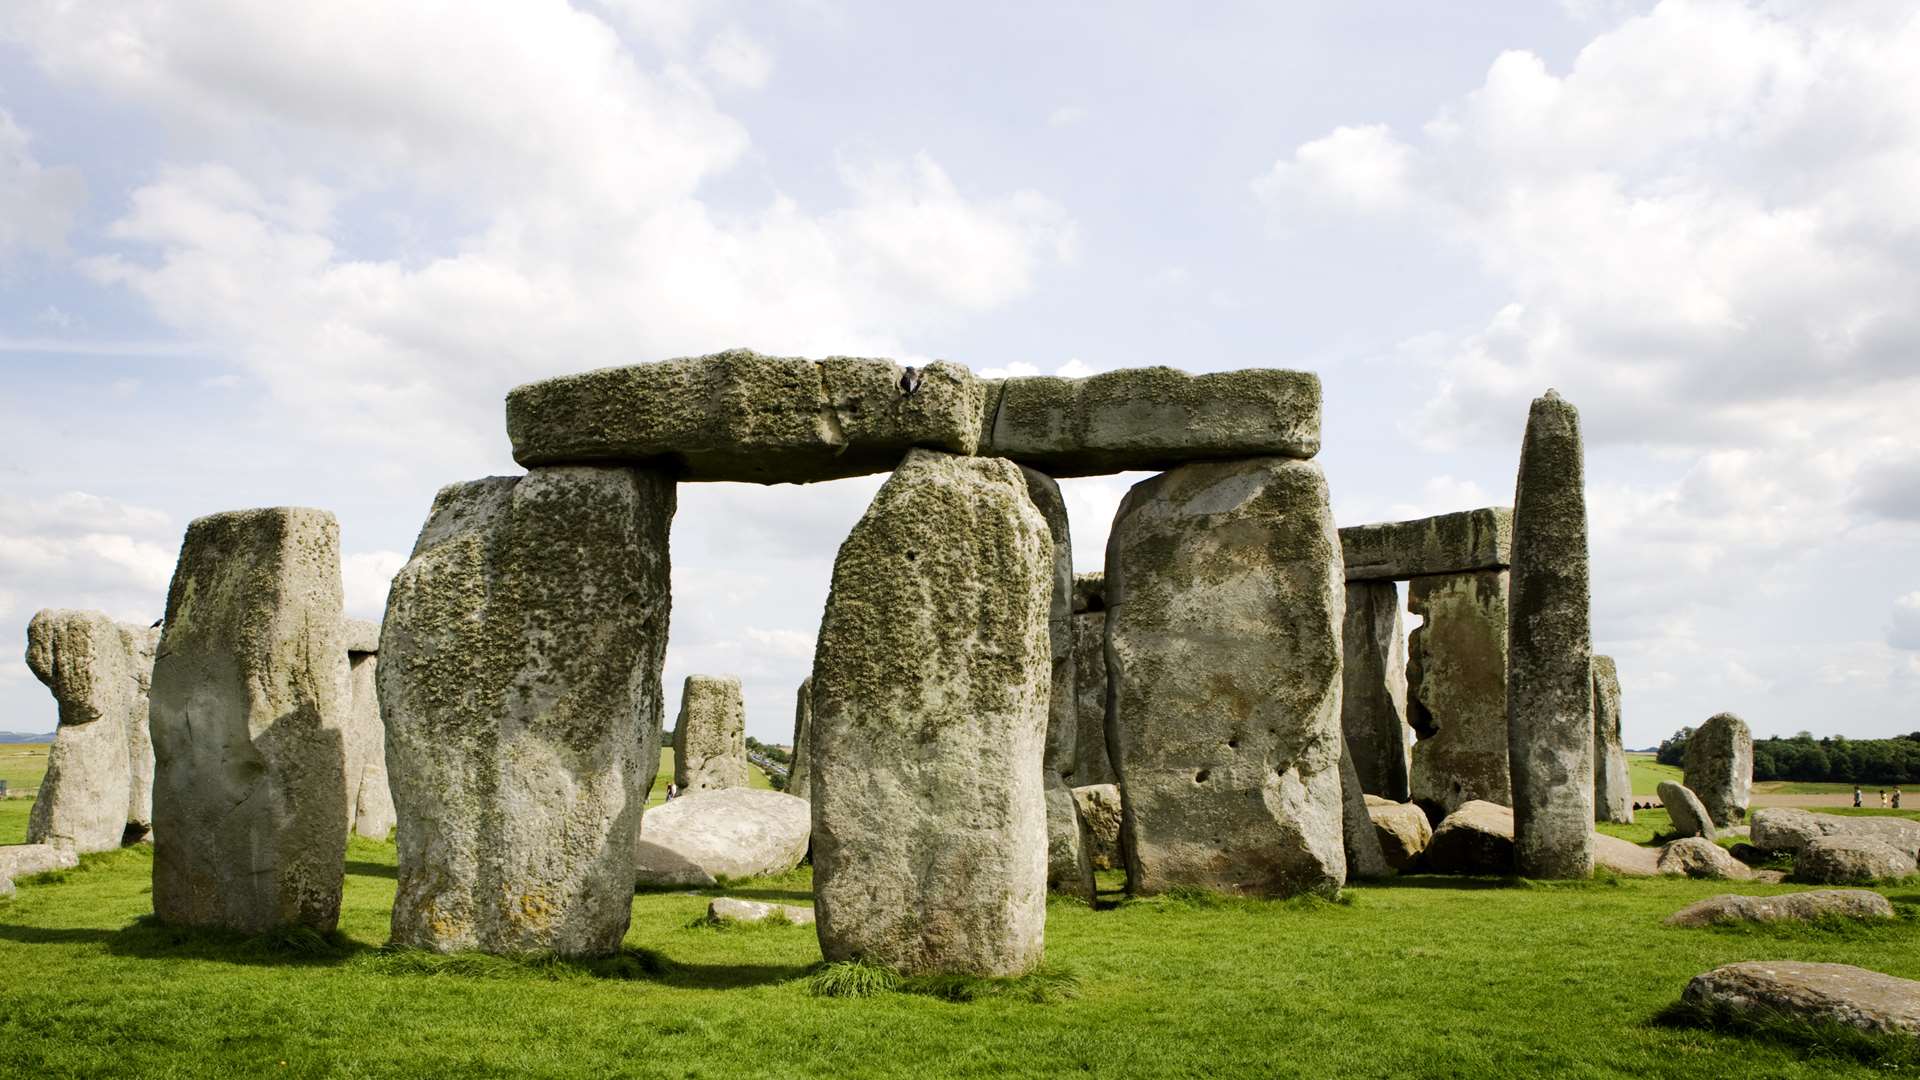 The real Stonehenge in Wiltshire